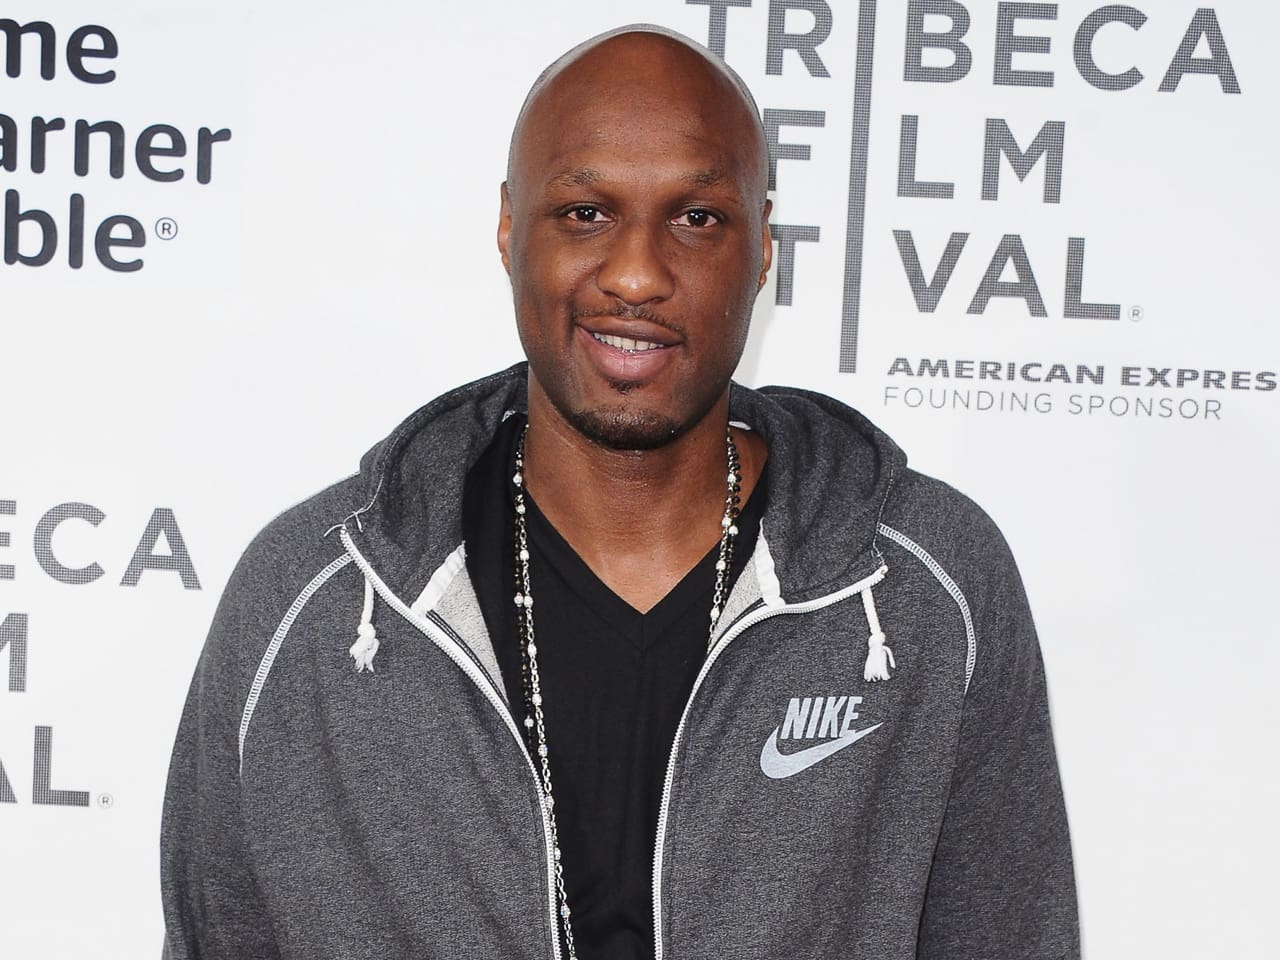 Lamar Odom Announces Fans That He's Considering A Second Book - His GF, Sabrina Parr Offers Him Full Support - See Their Messages